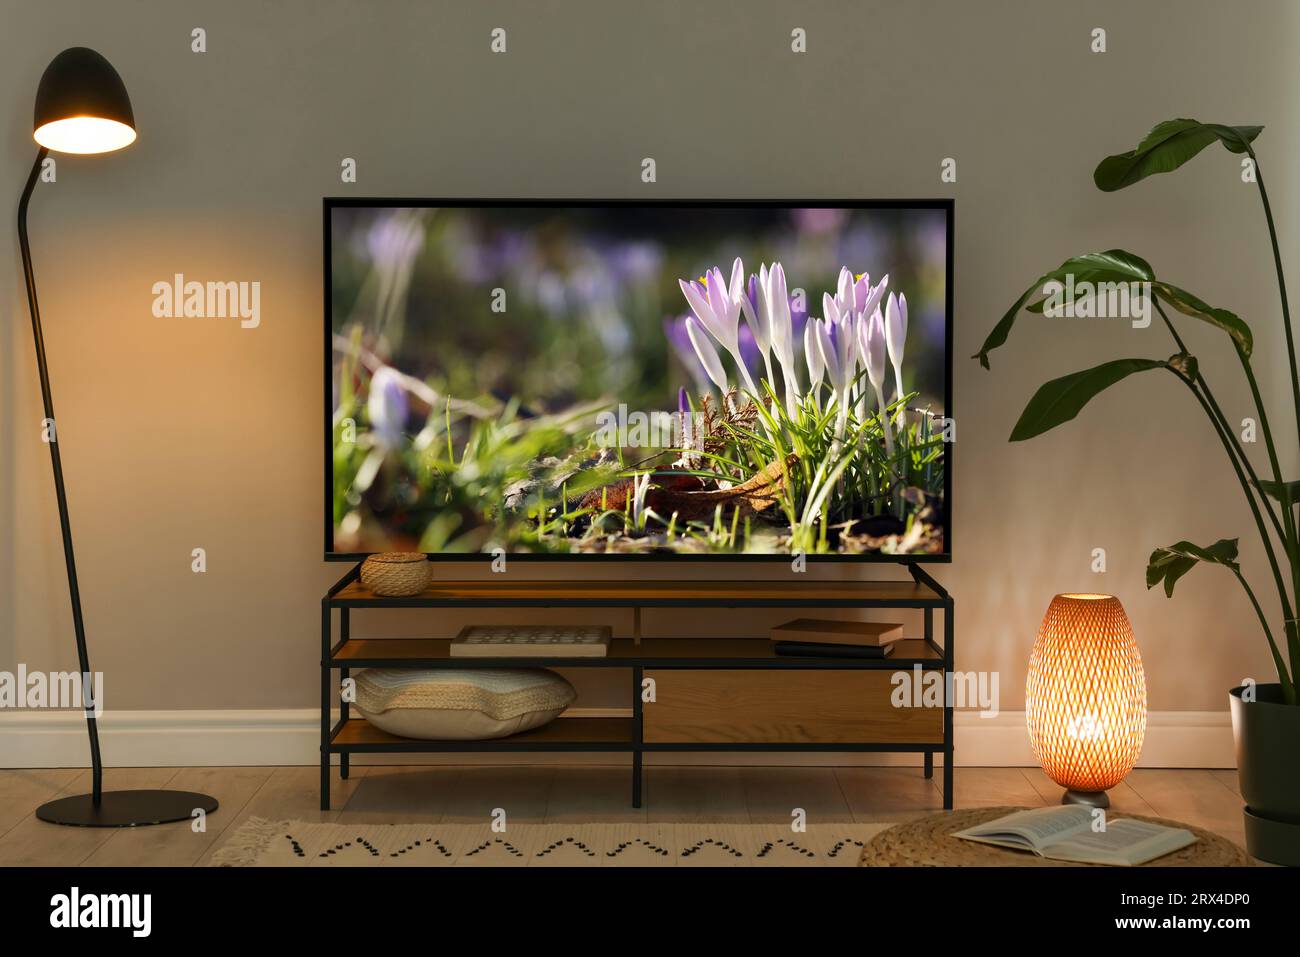 Small flowers on TV screen in room Stock Photo